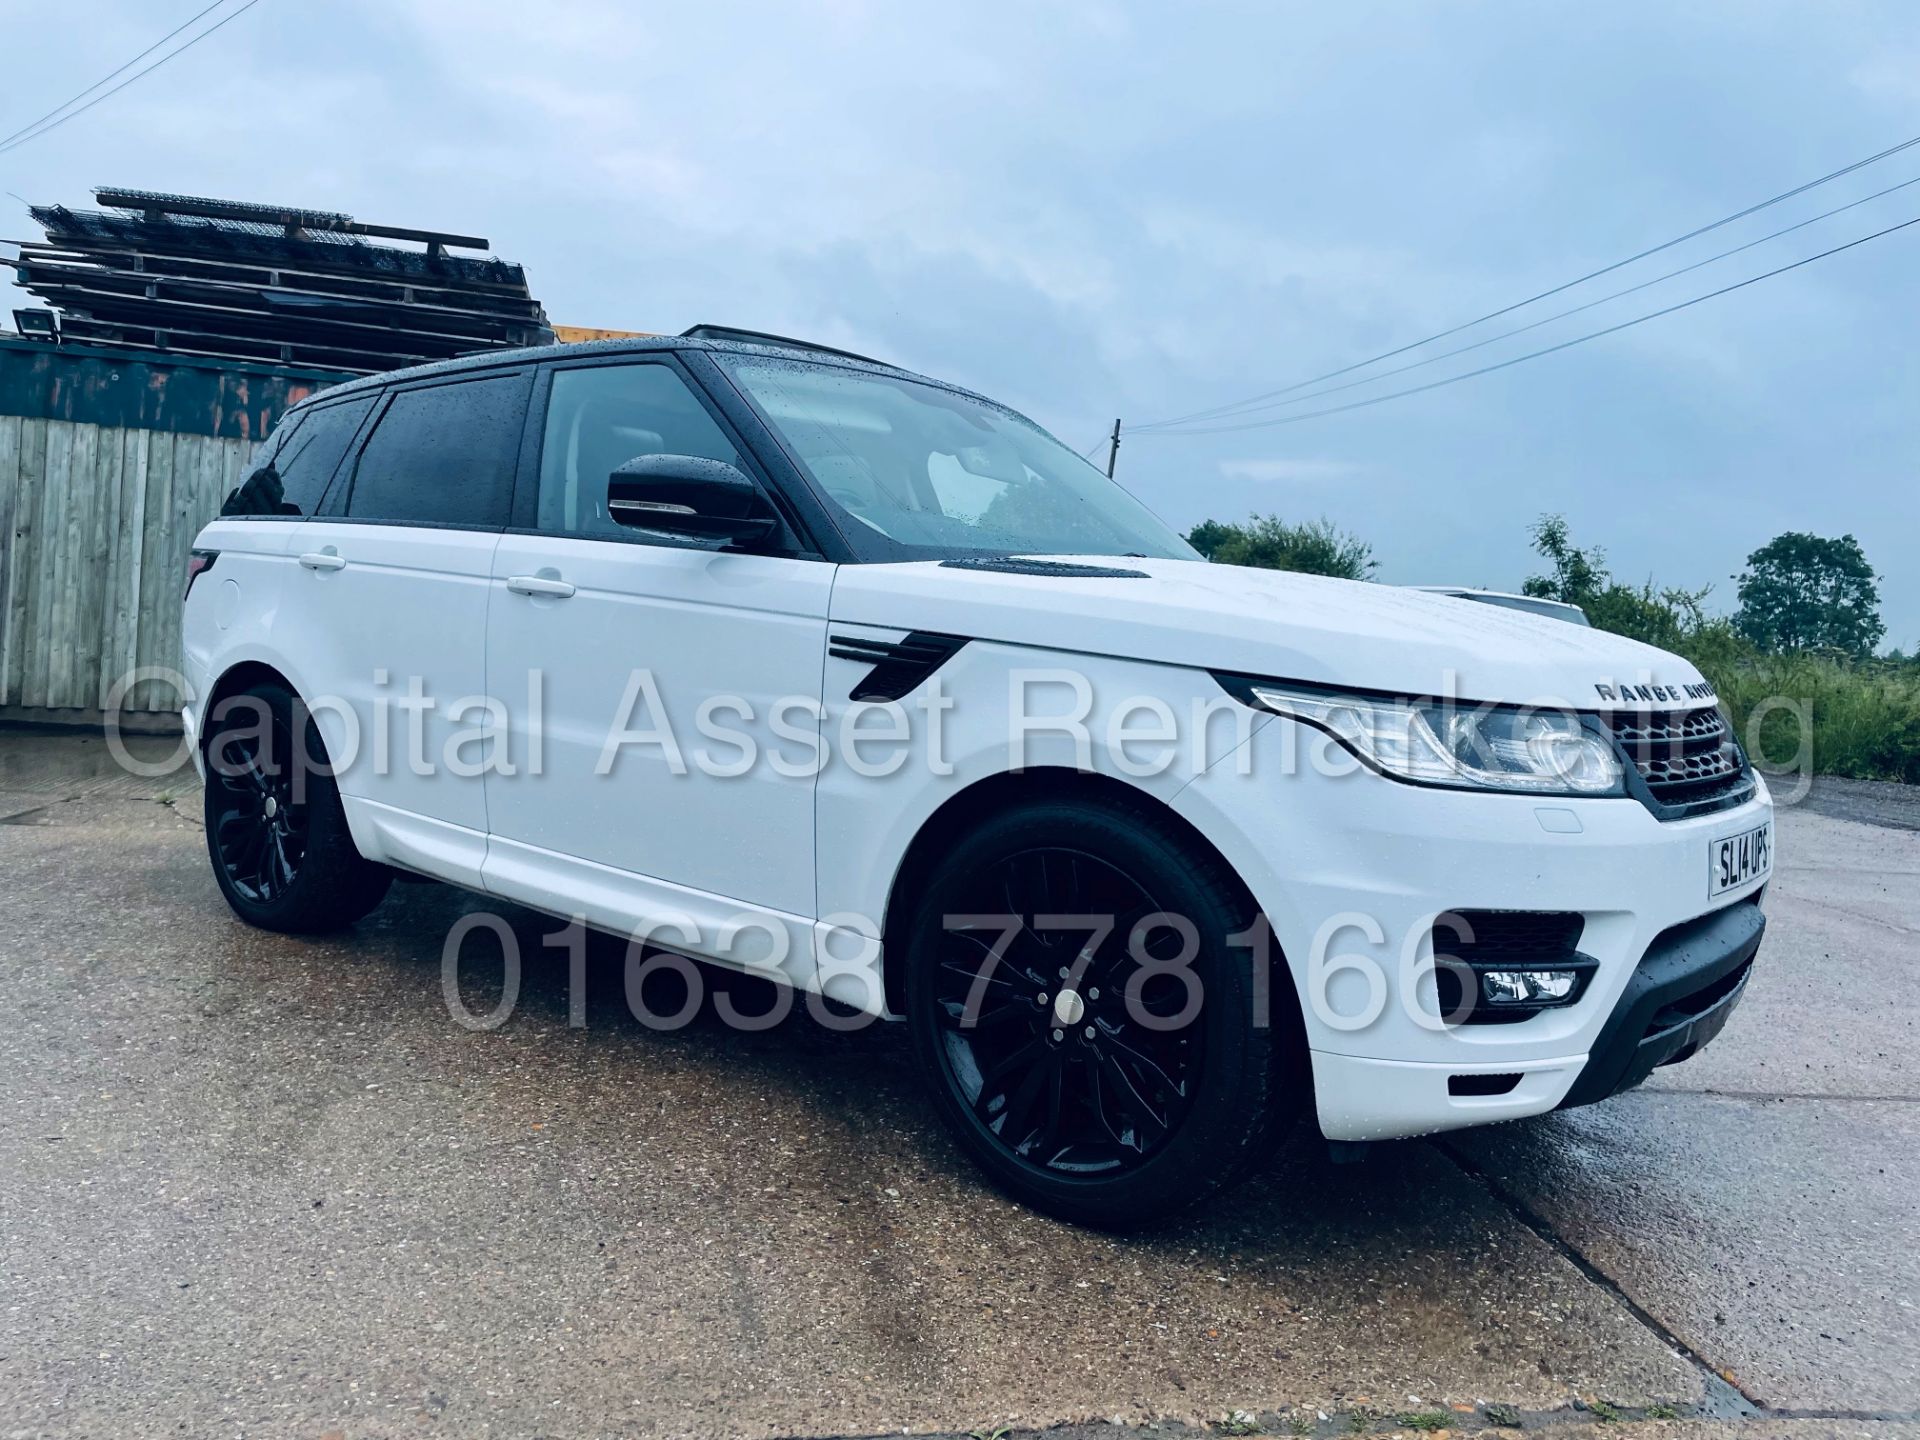 (On Sale) RANGE ROVER SPORT *SPECIAL EDITION* (2014 - FACELIFT) '3.0 TDV6 - AUTO' *NAV & PAN ROOF* - Image 2 of 54